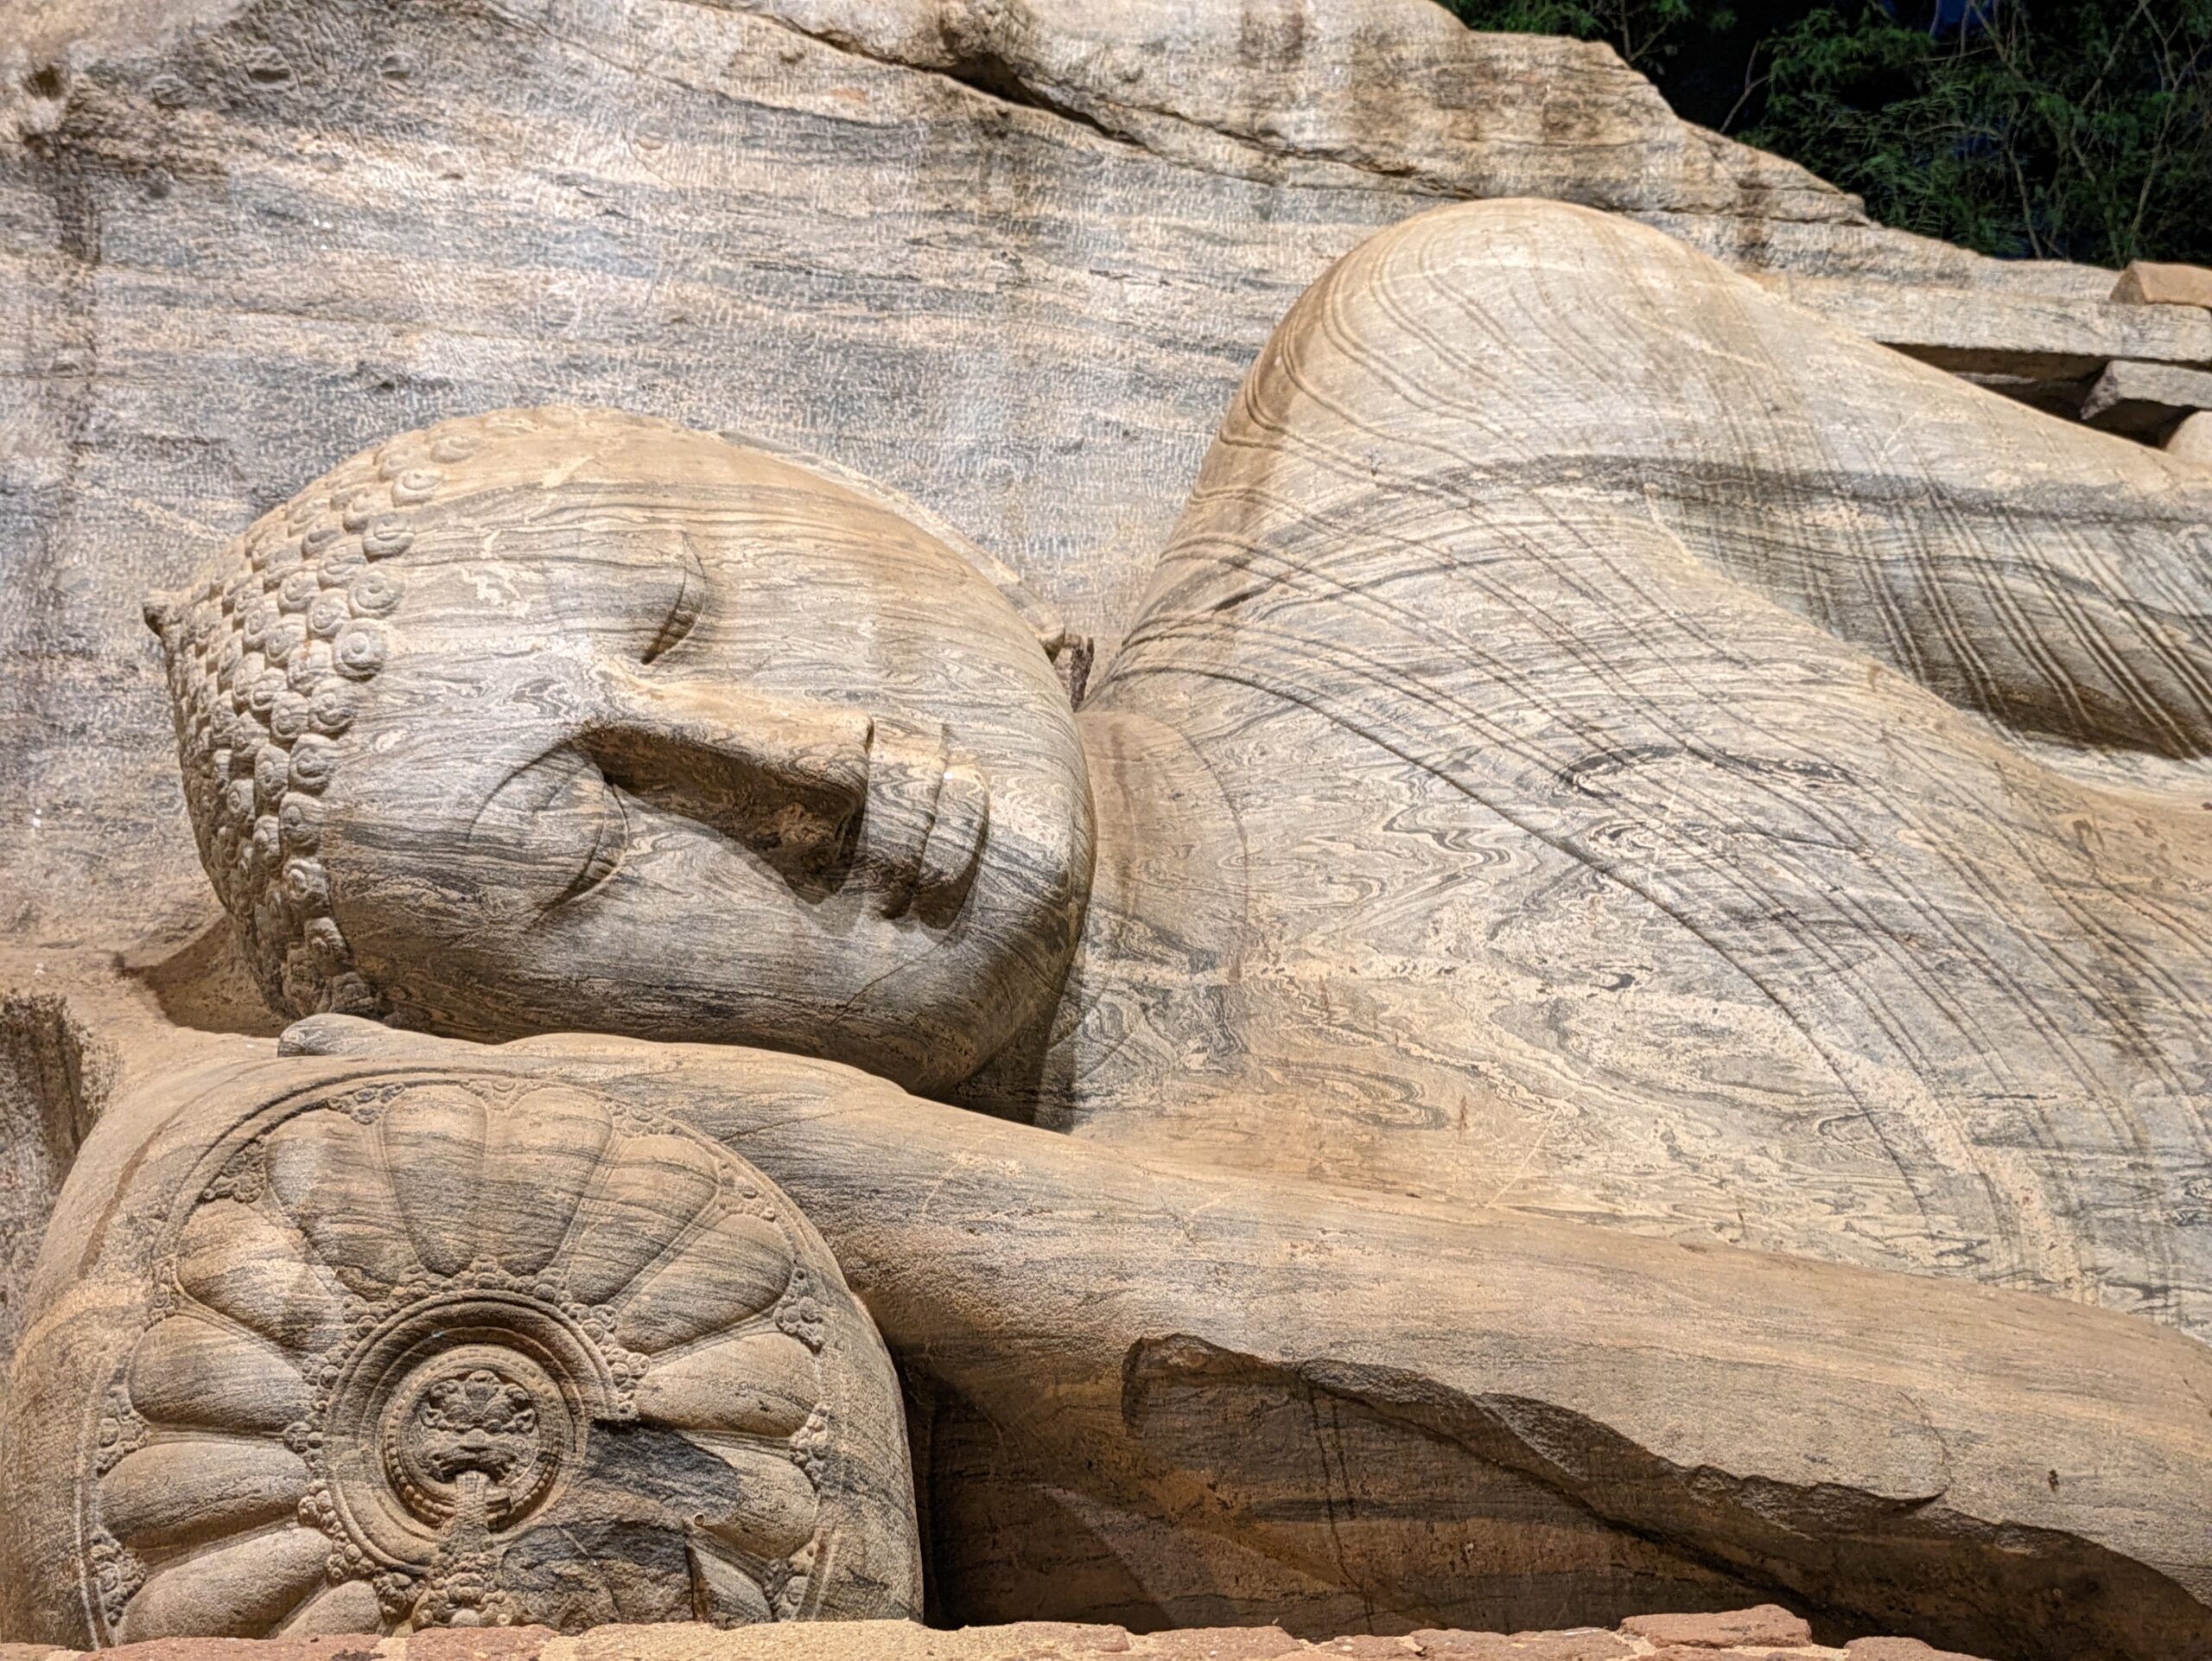 Detailed carving in lying Buddha at Polonnaruwa